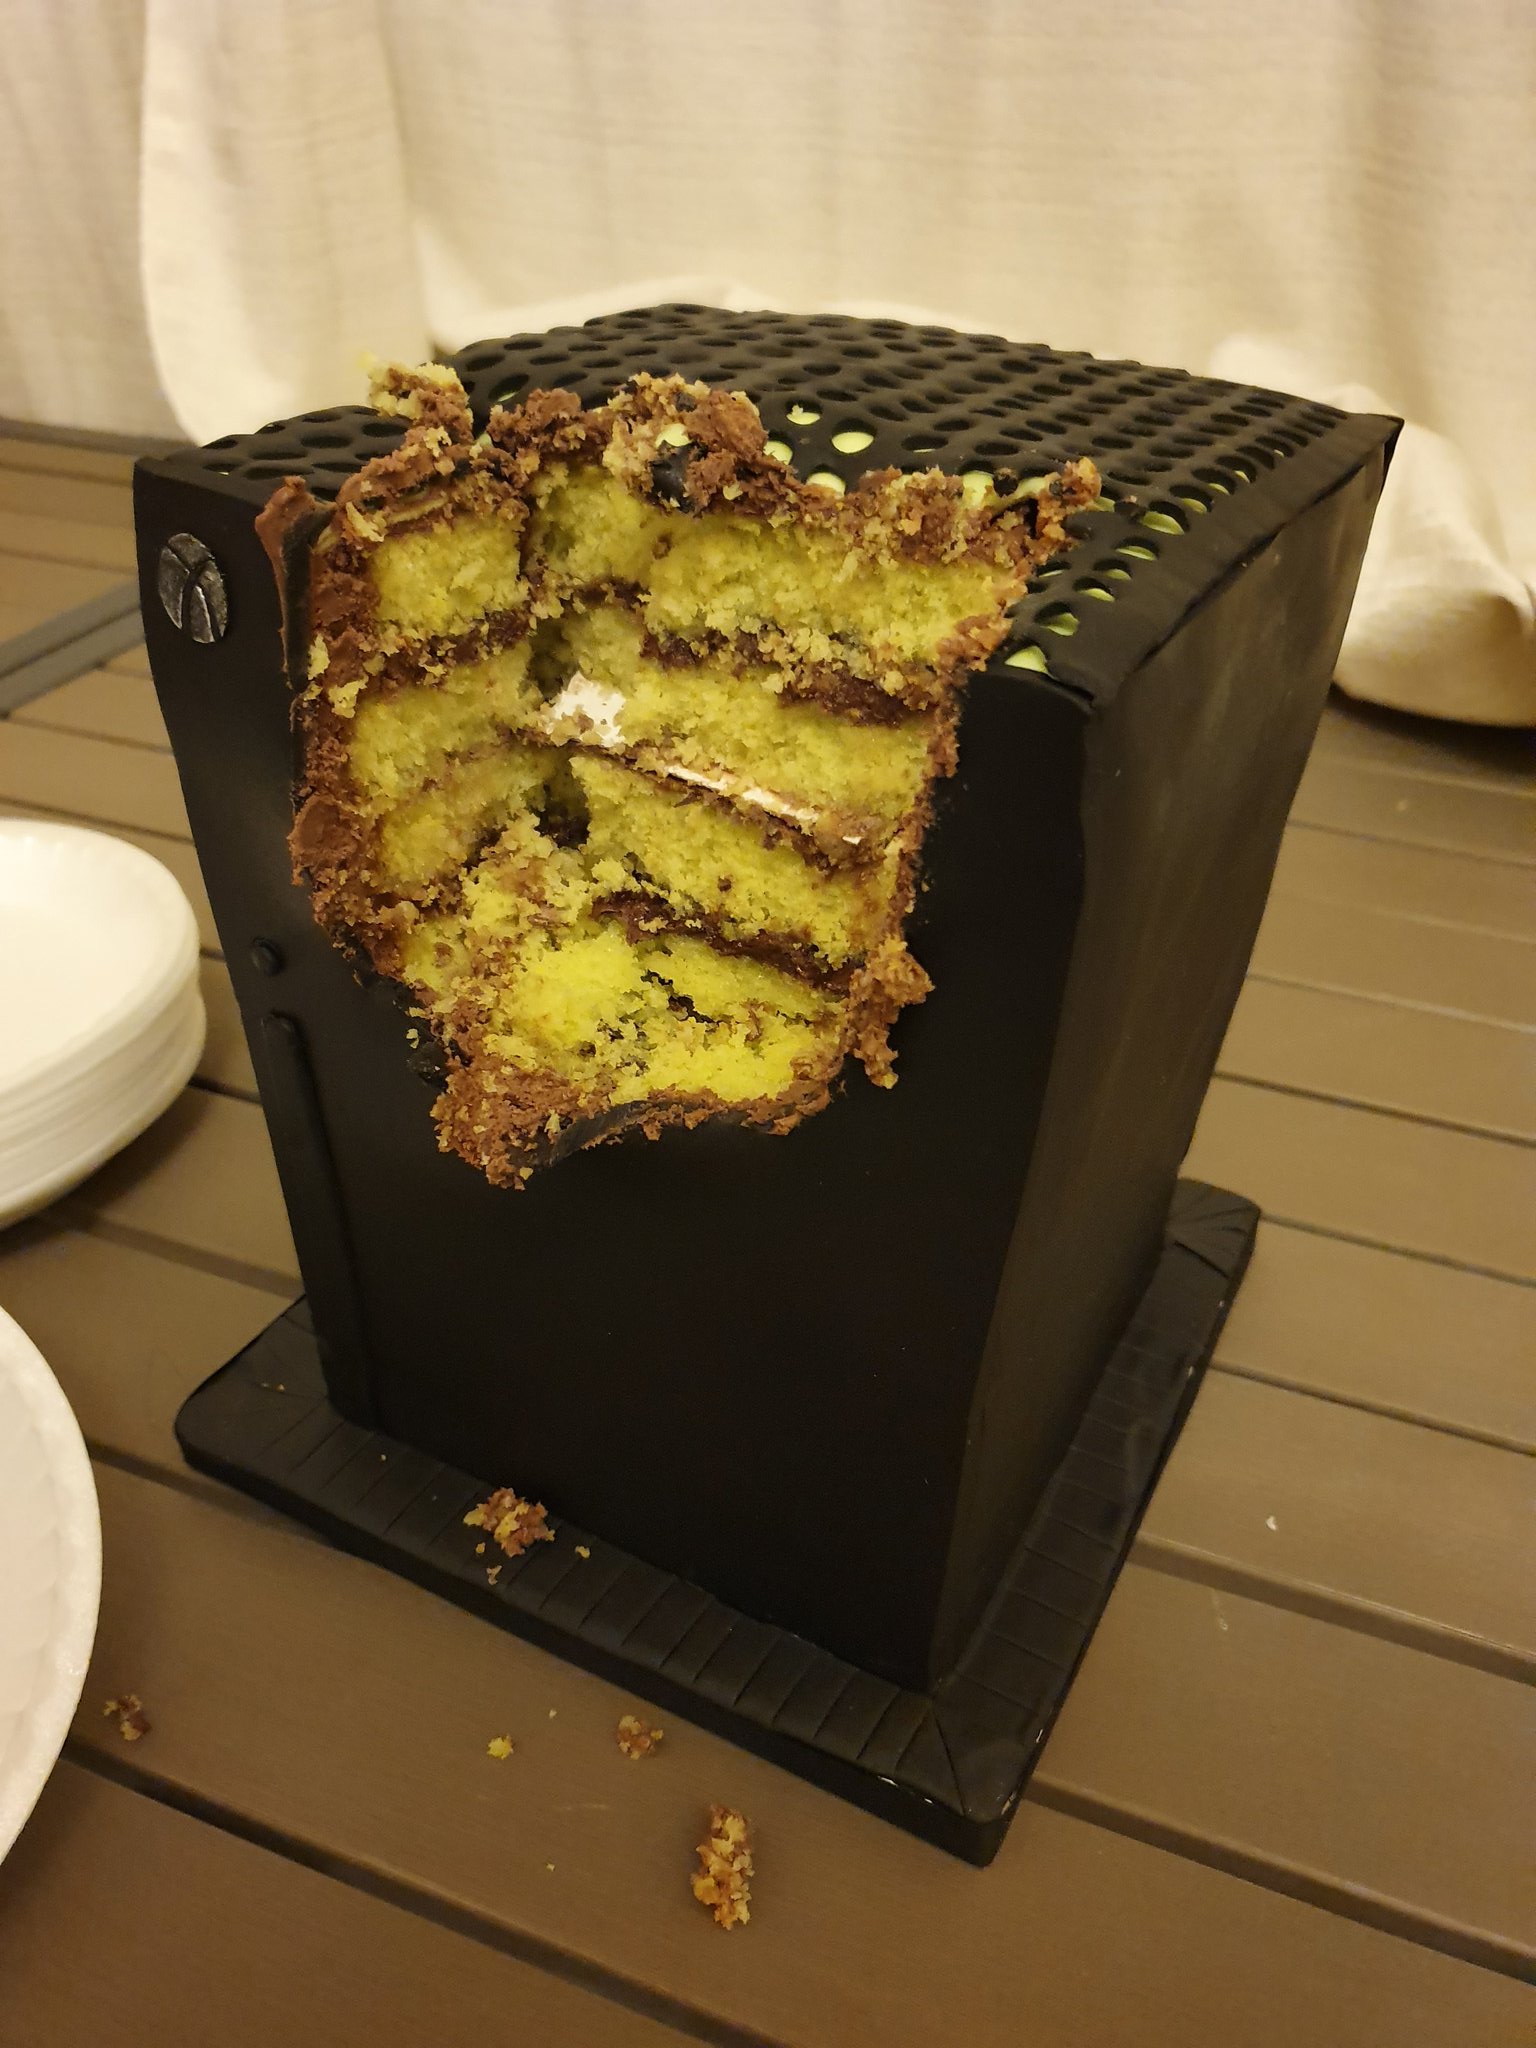 Xbox Series X Cake Made by Evilworld3 - AMD3D